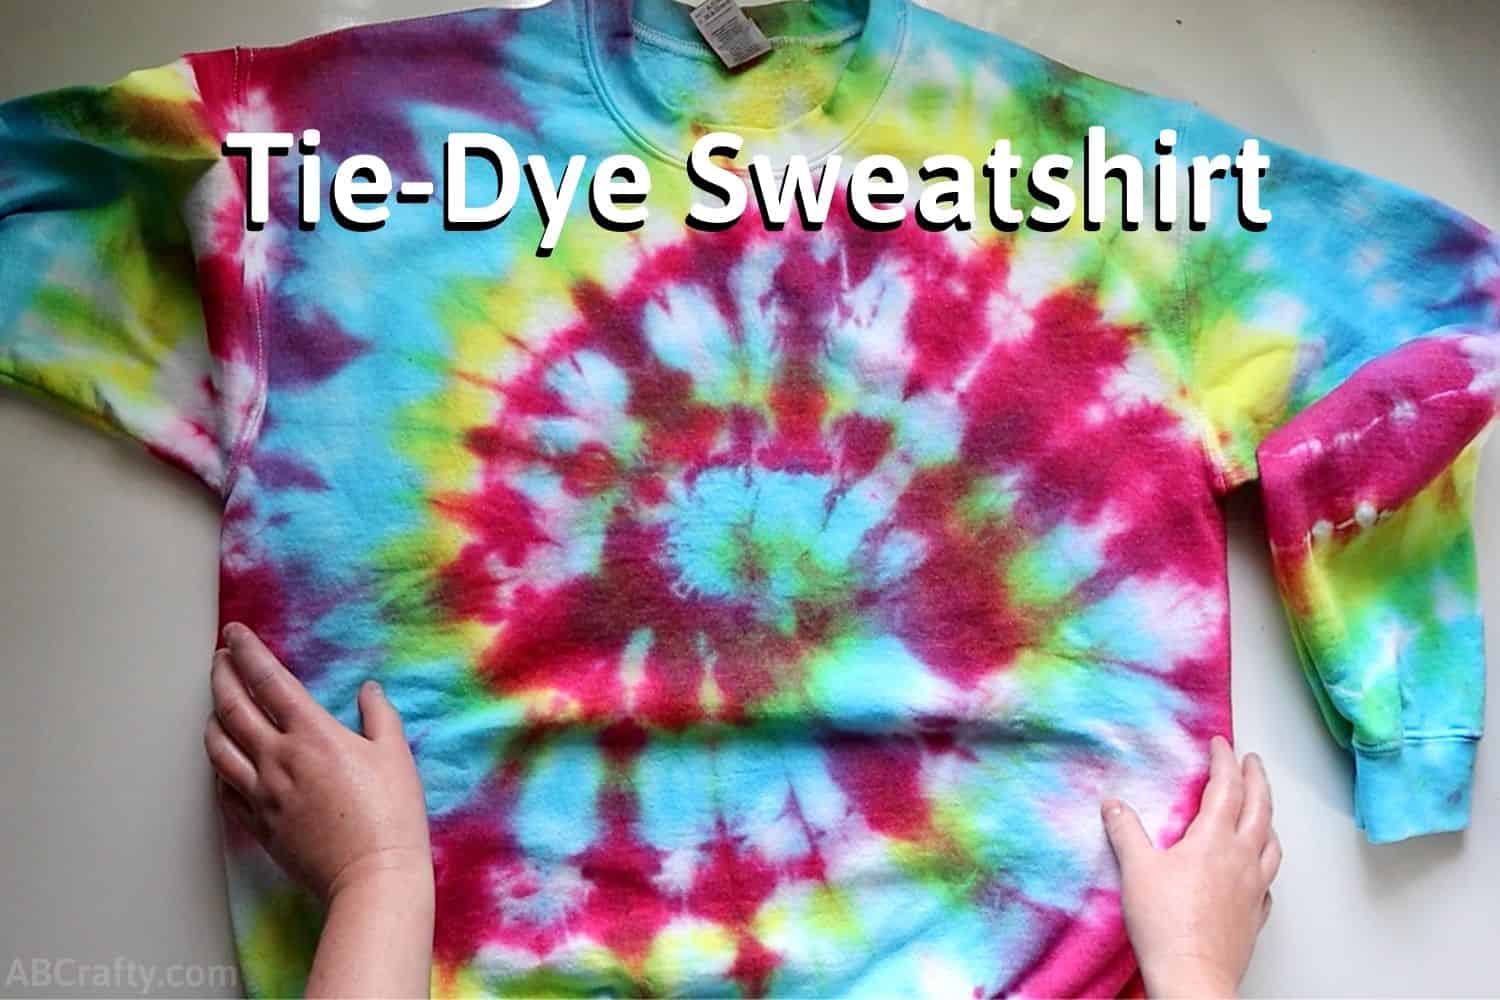 Common Mistakes To Avoid With Your Tie Dye Removing Products